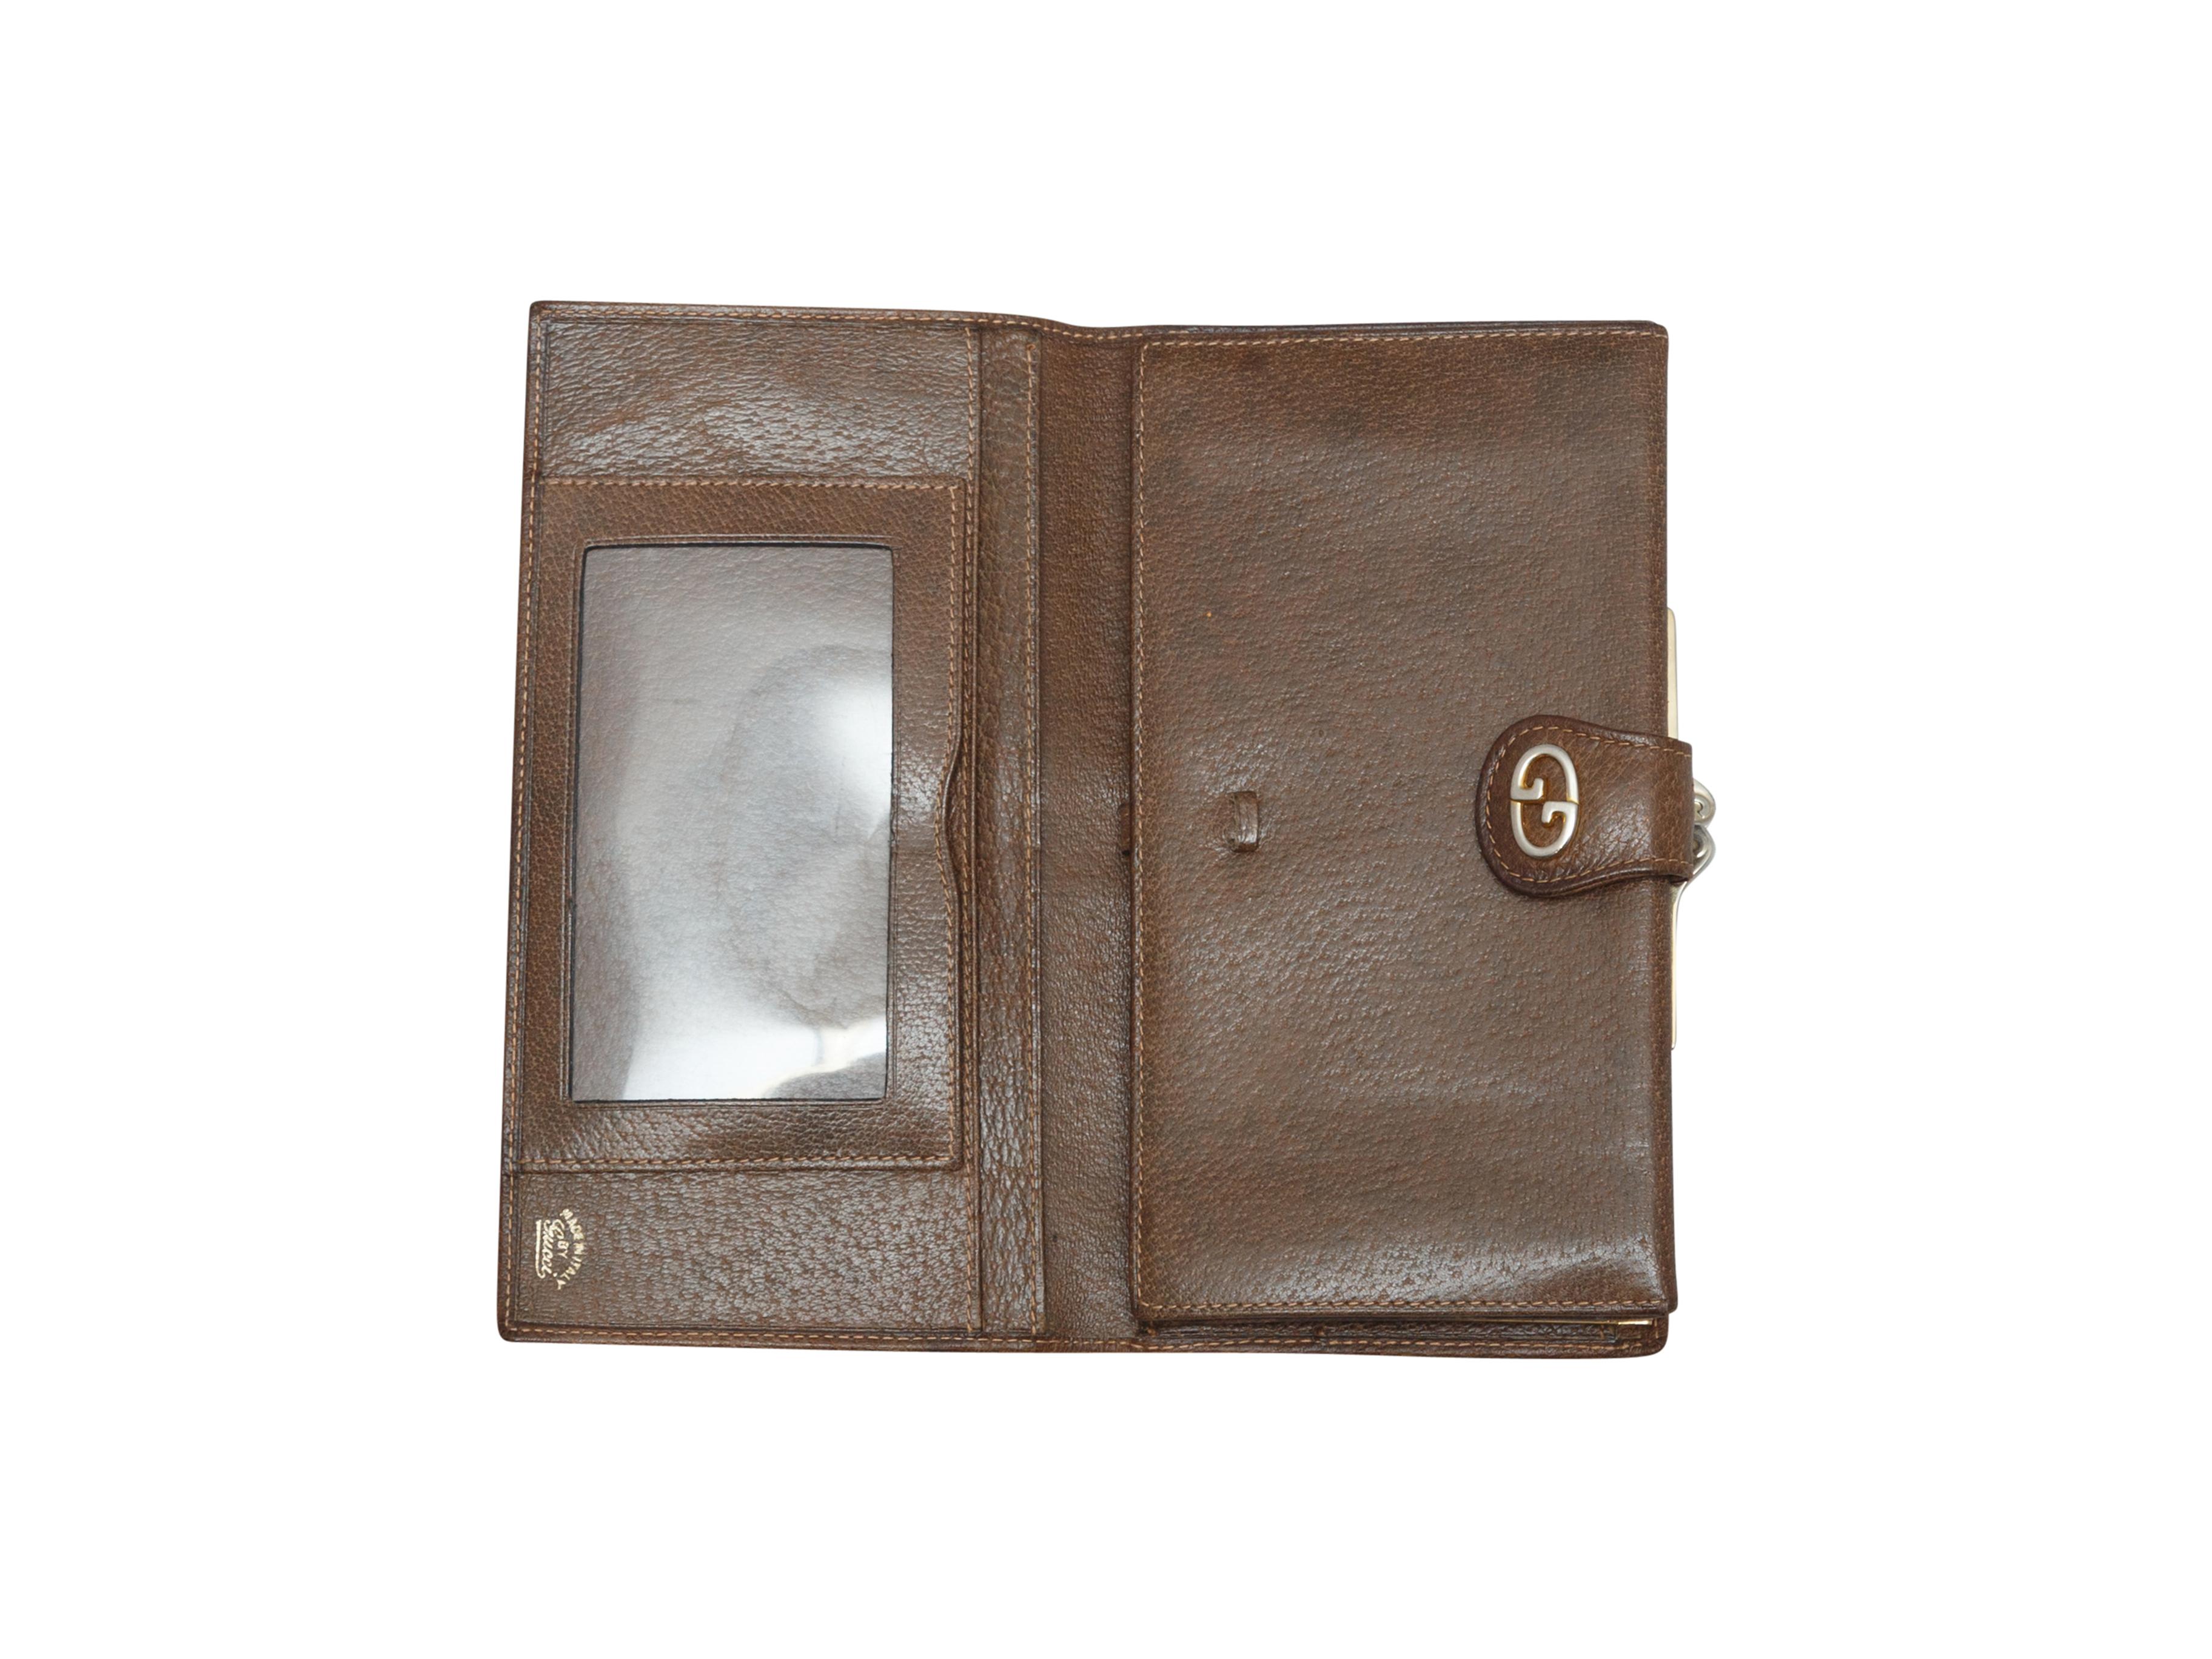 Product details: Vintage brown leather wallet by Gucci. Gucci Web accent strip at center. GG snap closure at front. Interior coin pouch, money and card slots. 7.63